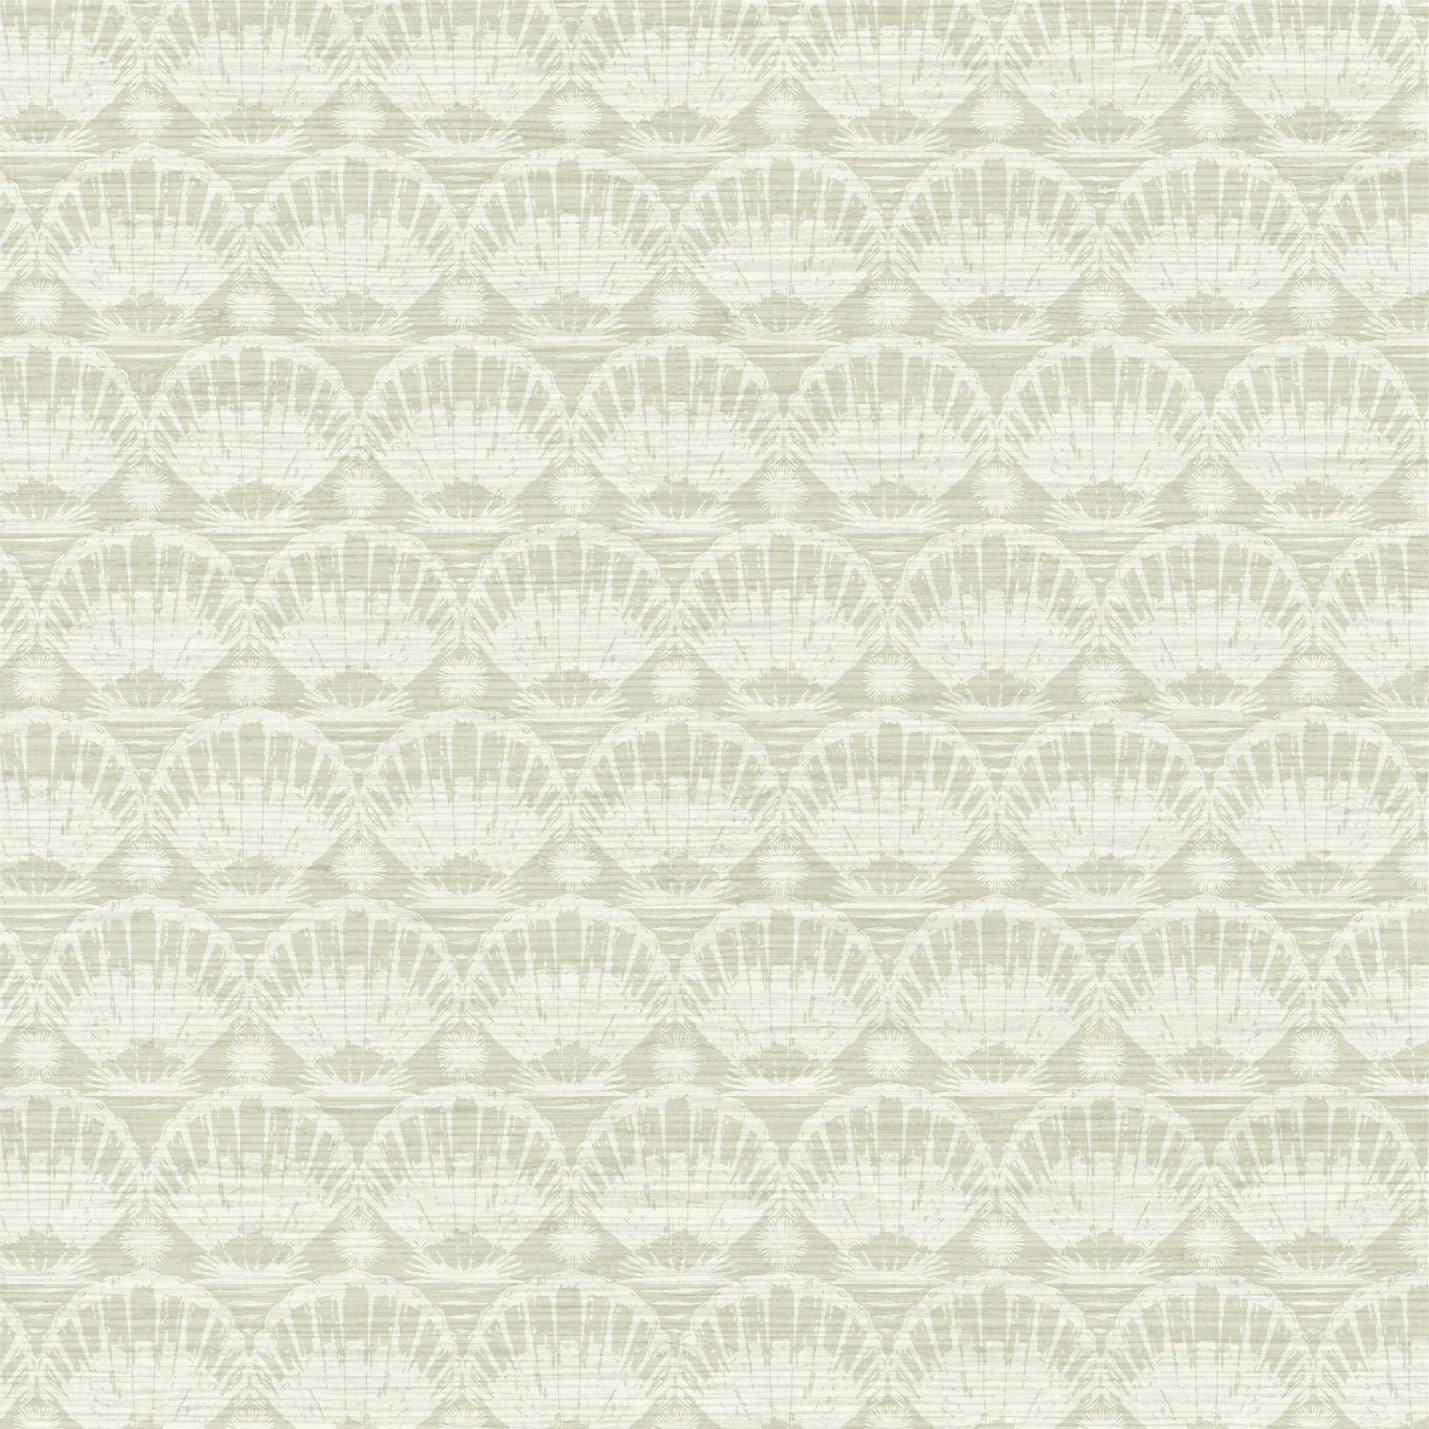 Load image into Gallery viewer, printed grasscloth wallpaper seashell horizontal stripe Natural Textured Eco-Friendly Non-toxic High-quality  Sustainable practices Sustainability Interior Design Wall covering custom tailor-made retro chic tropical bespoke nature Seaside Coastal Seashore Waterfront Vacation home styling Retreat Relaxed beach vibes Beach cottage Shoreline Oceanfront Nautical neutral tan white off-white cream
